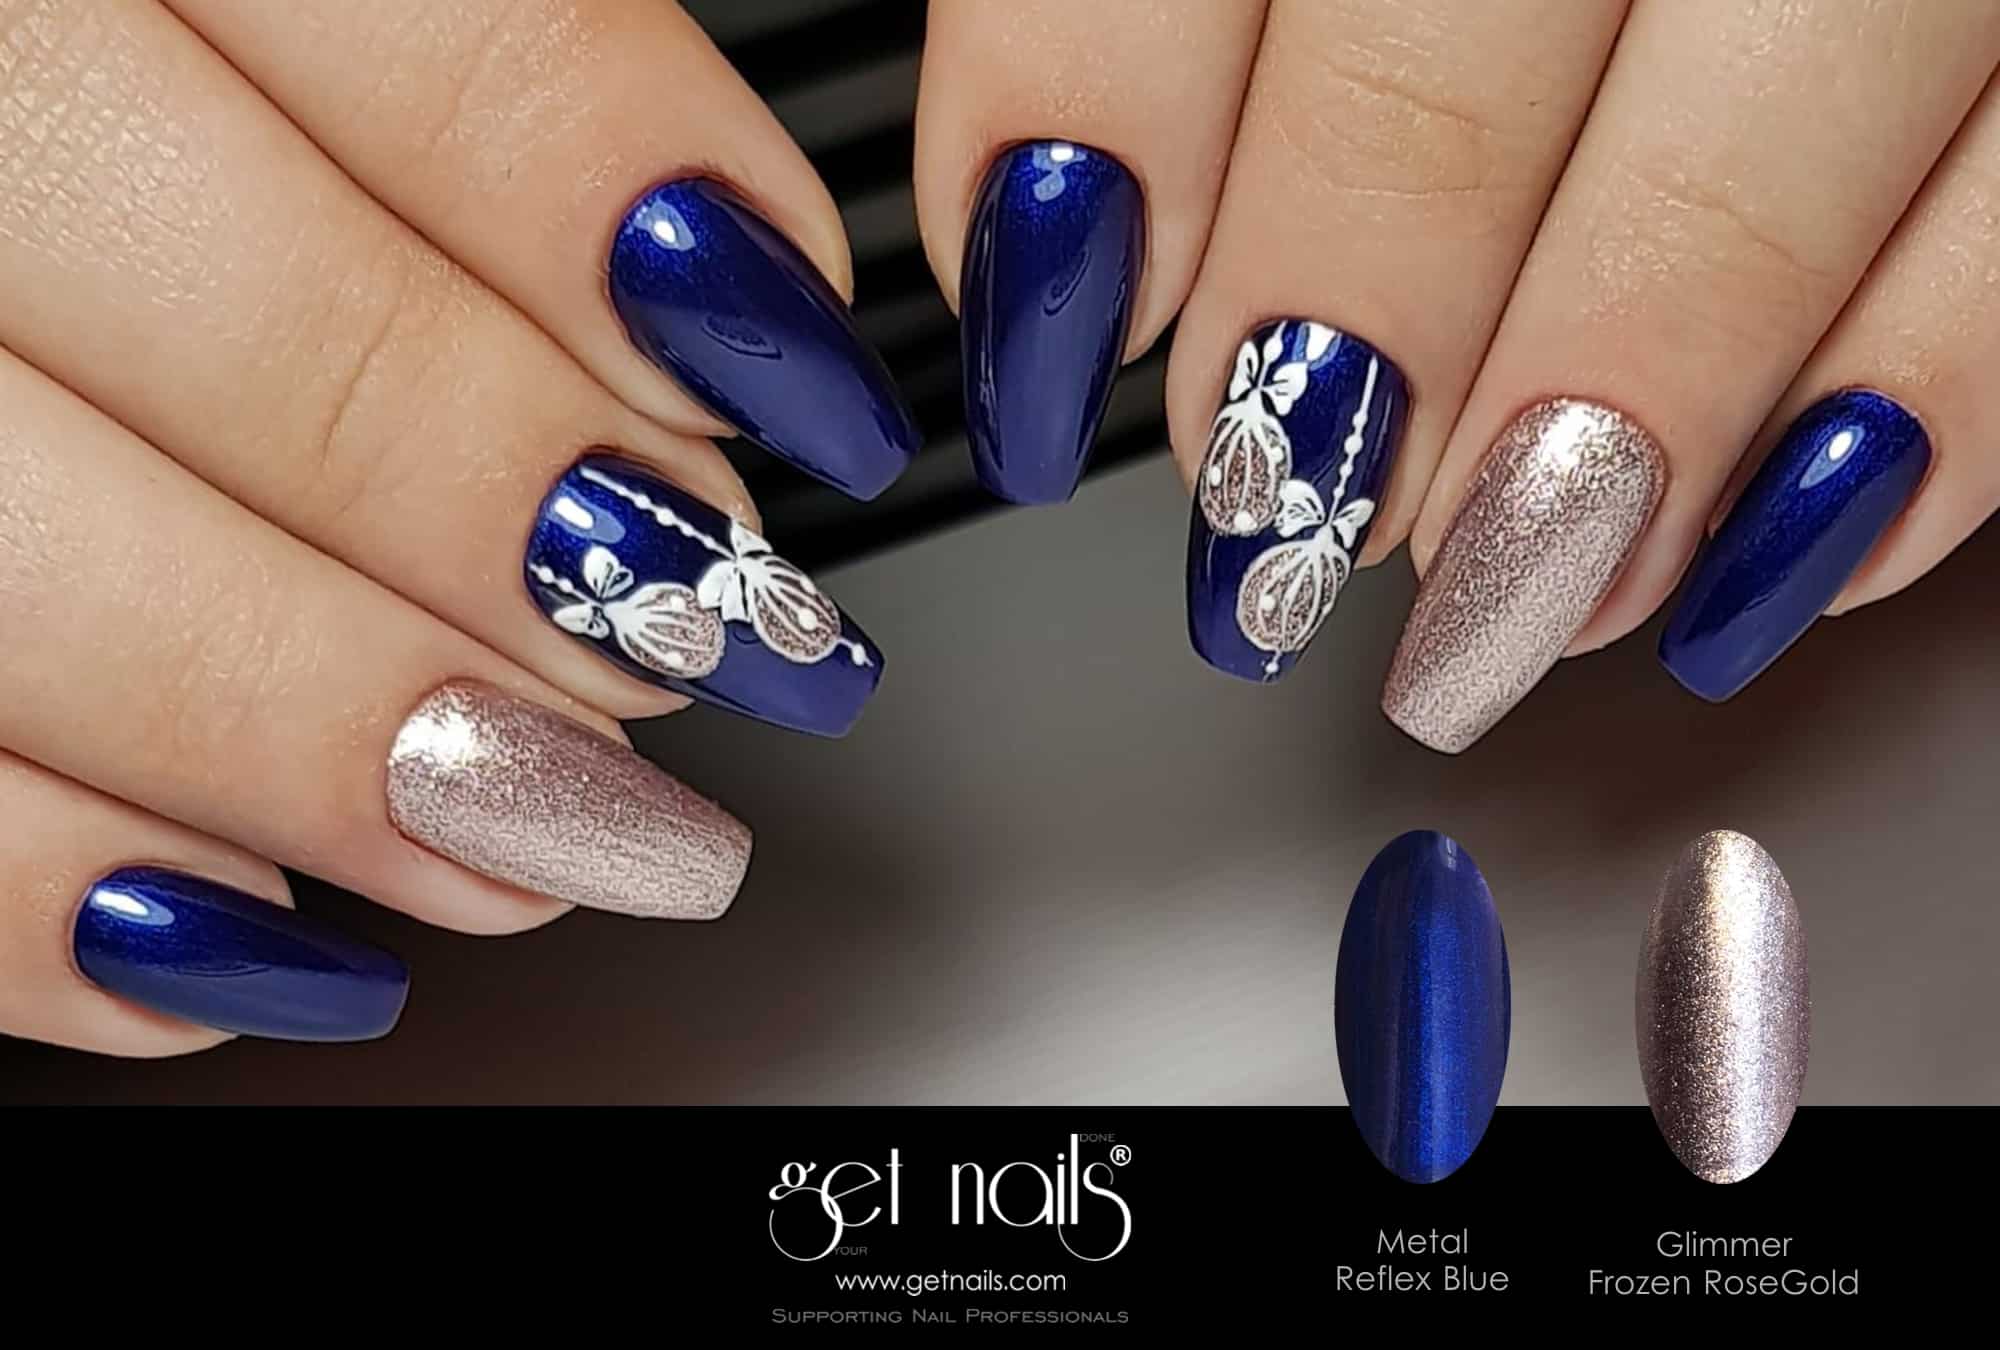 3. "Navy Blue and Gold Nail Art Ideas for a Formal Event" - wide 3